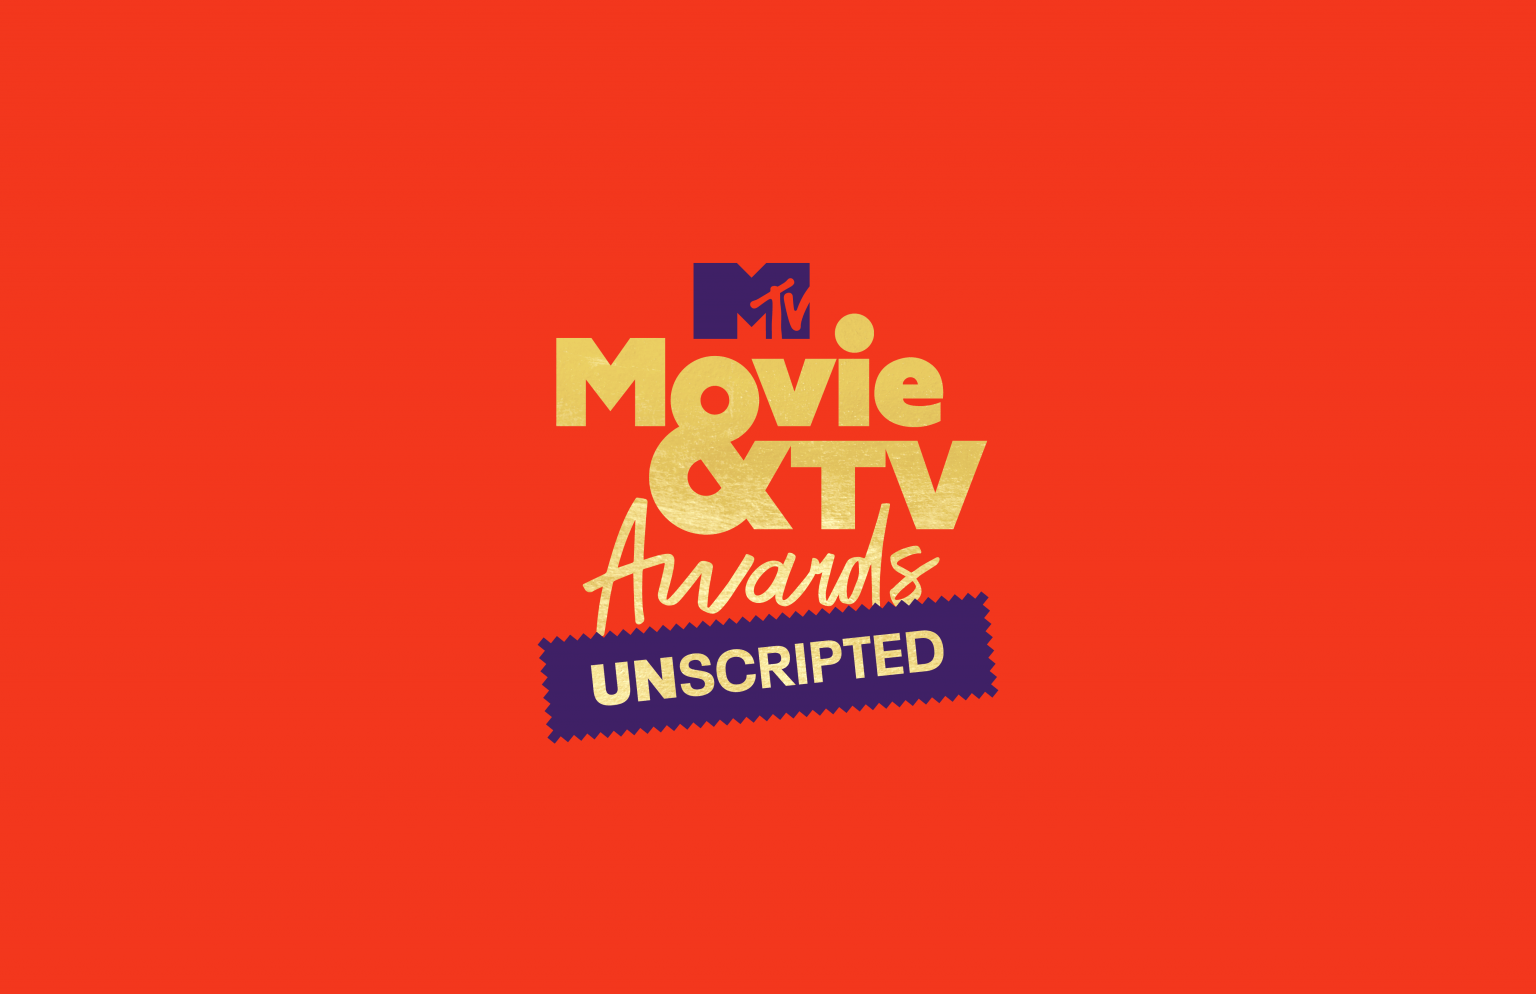 2021 "MTV Movie & TV Awards: UNSCRIPTED" complete winners ...